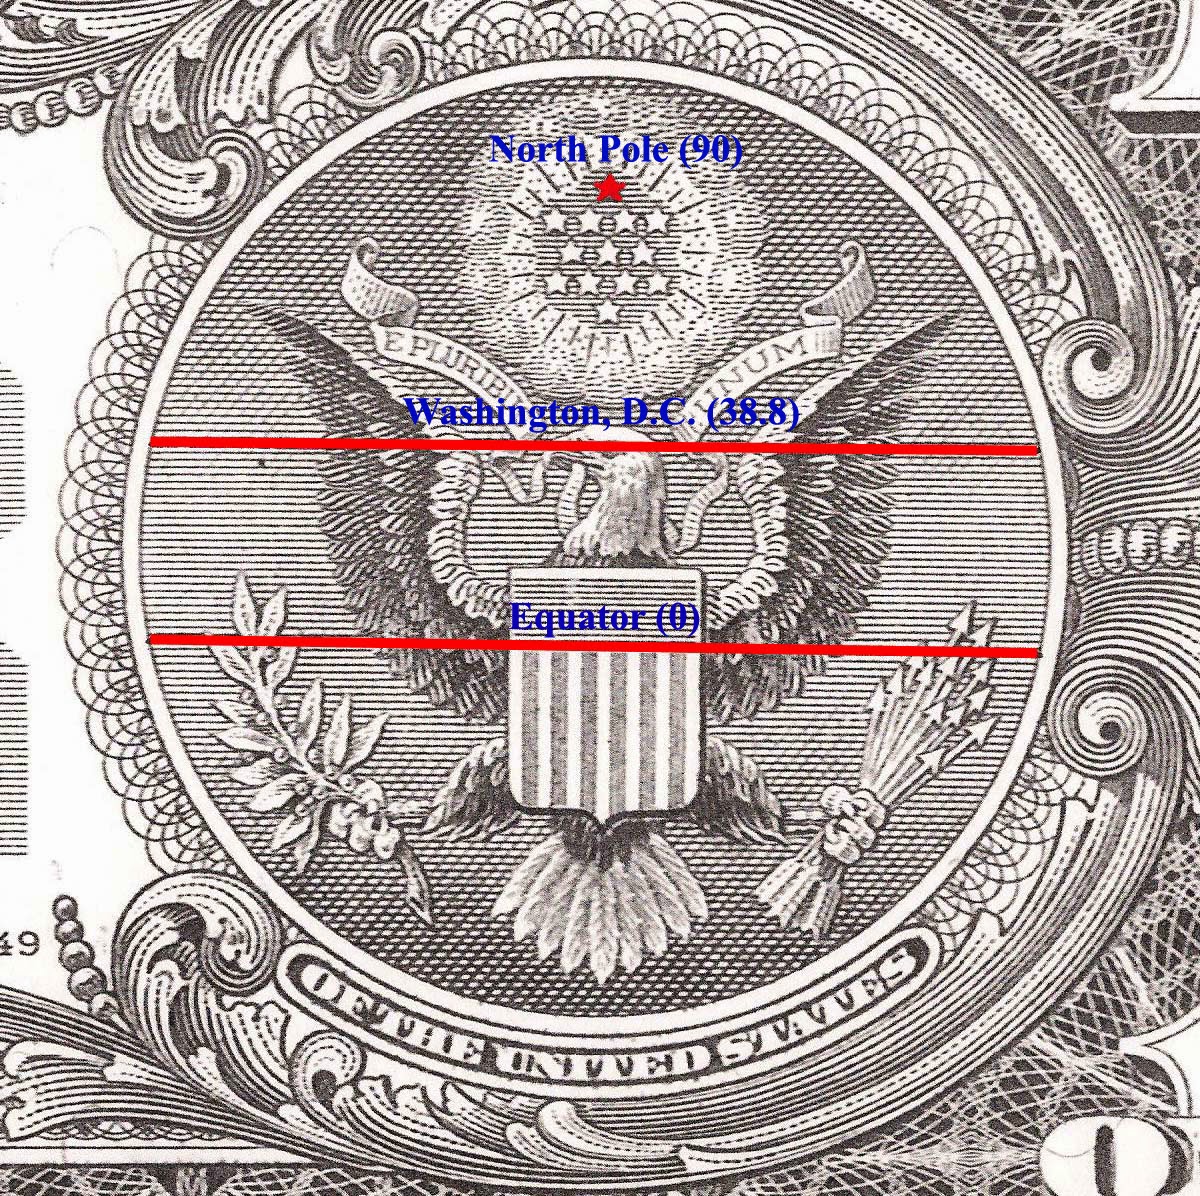 The End Times Forecaster Secret Map On The One Dollar Bill Leads To